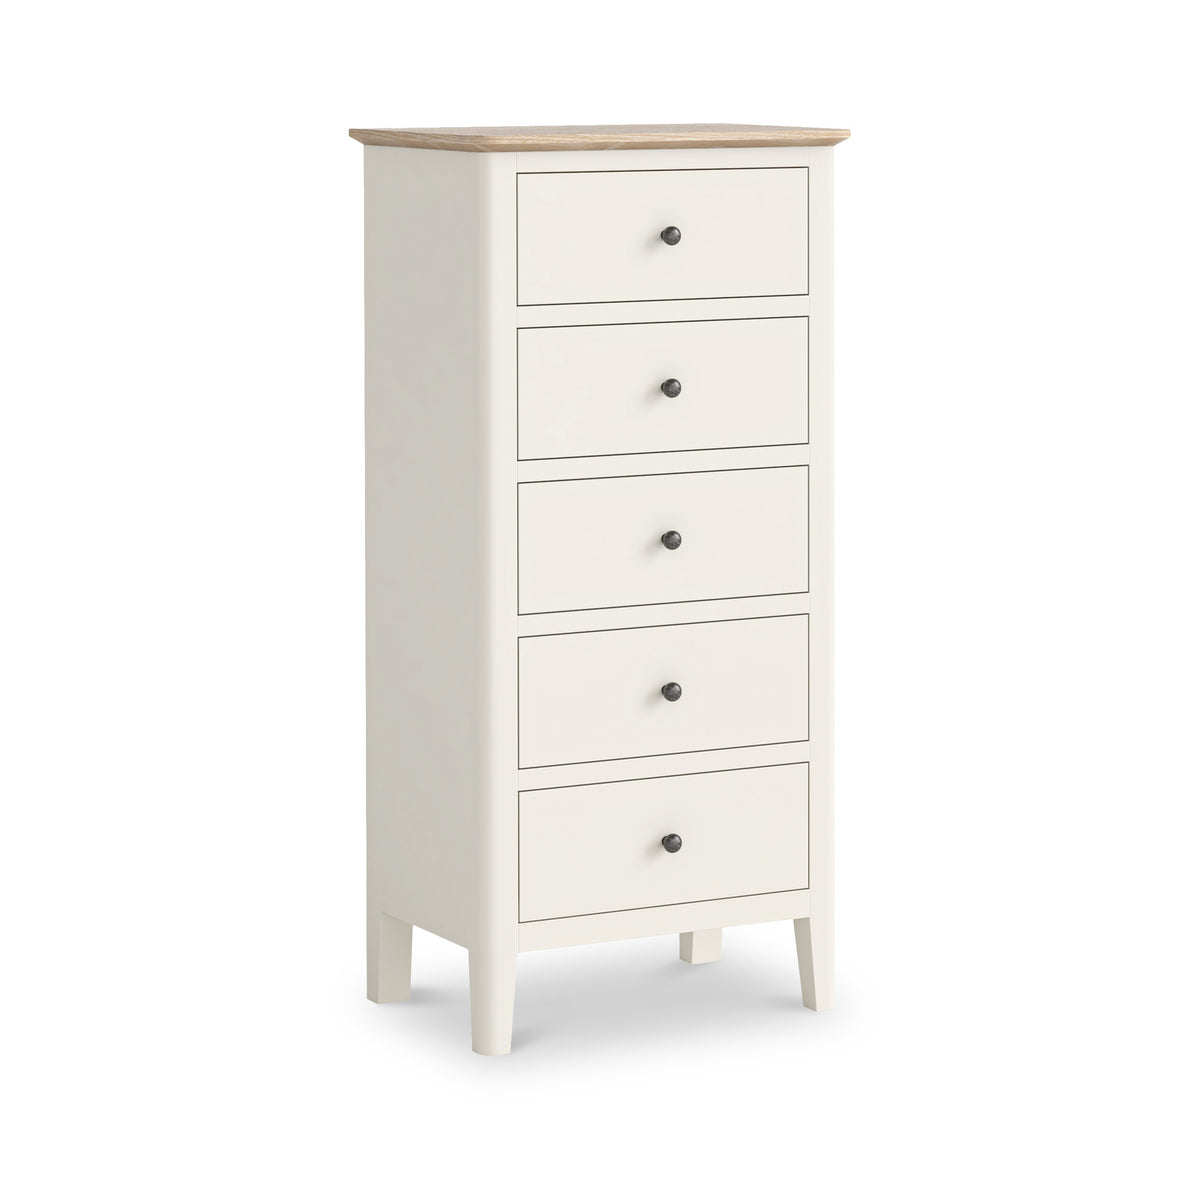 Penrose Coconut White Tallboy Chest of Drawer with metal handles from Roseland Furniture